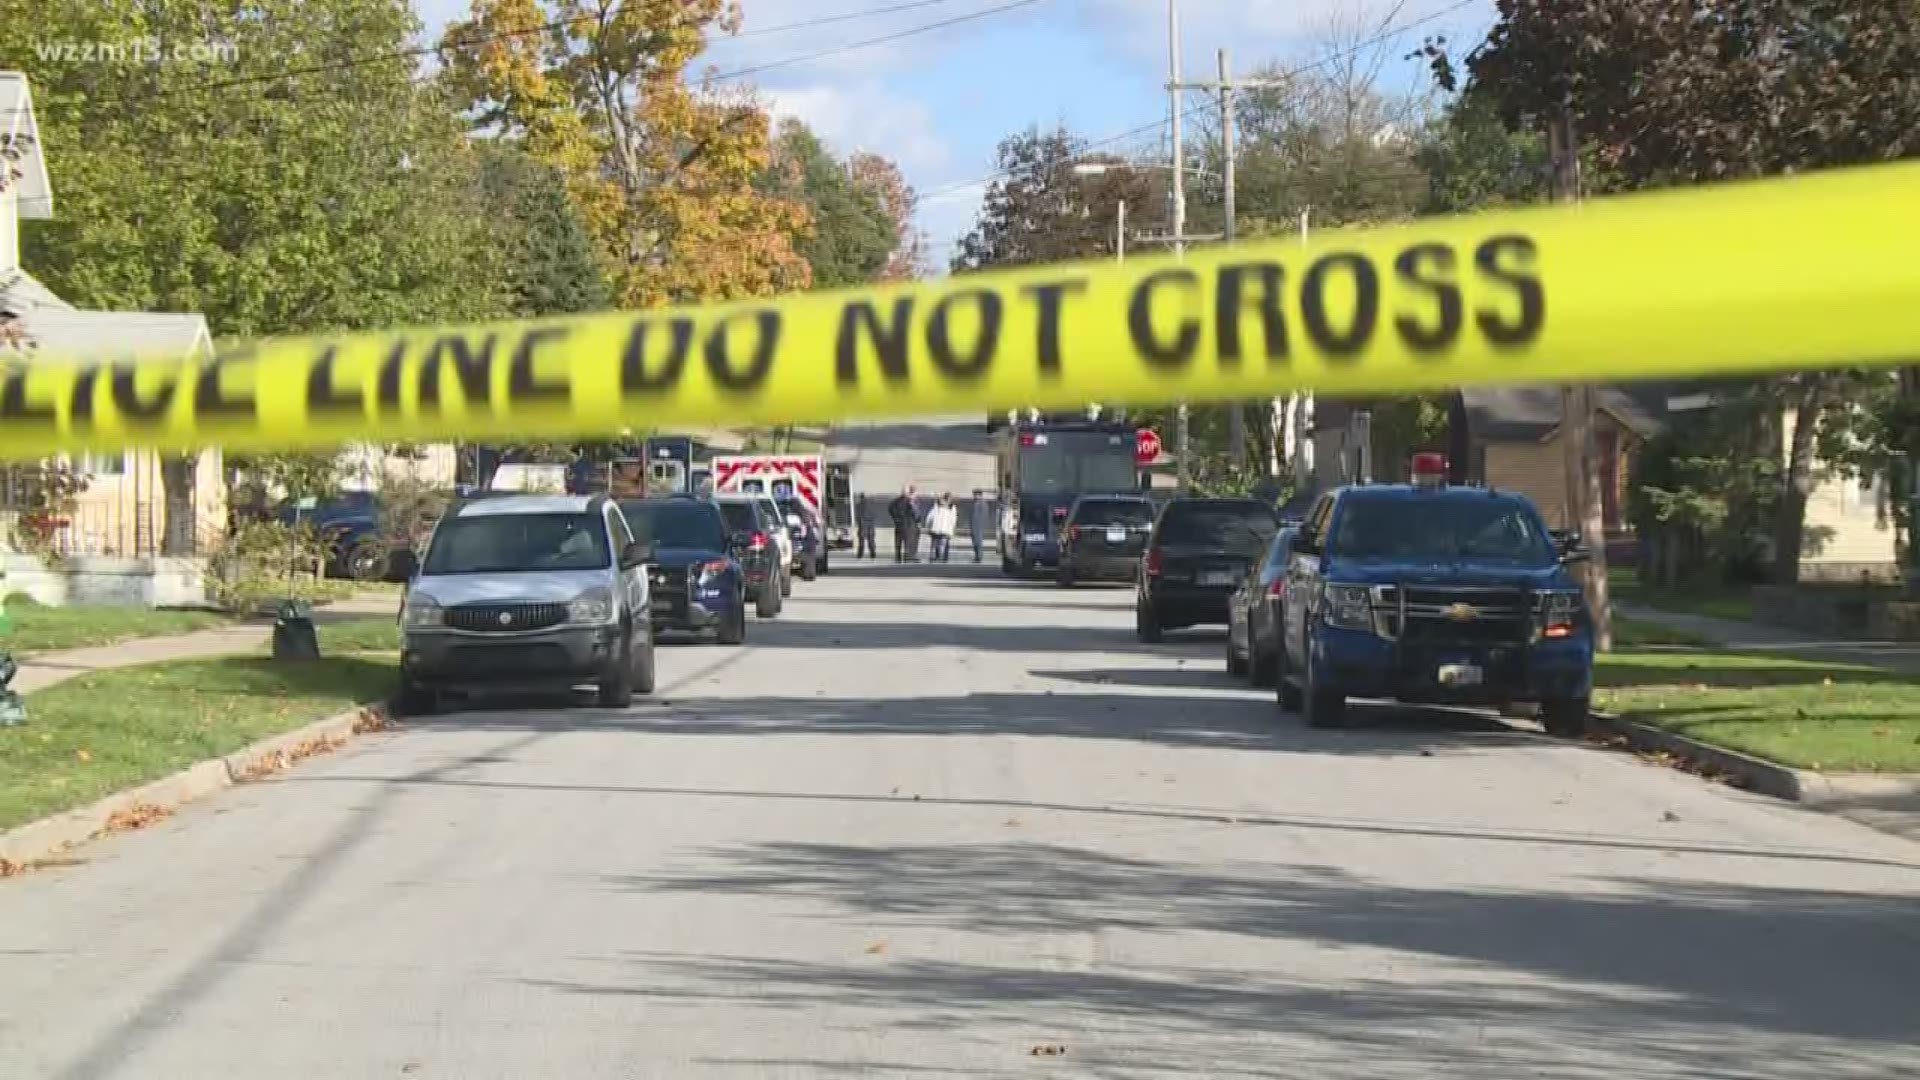 Grand Rapids standoff ends after six hours